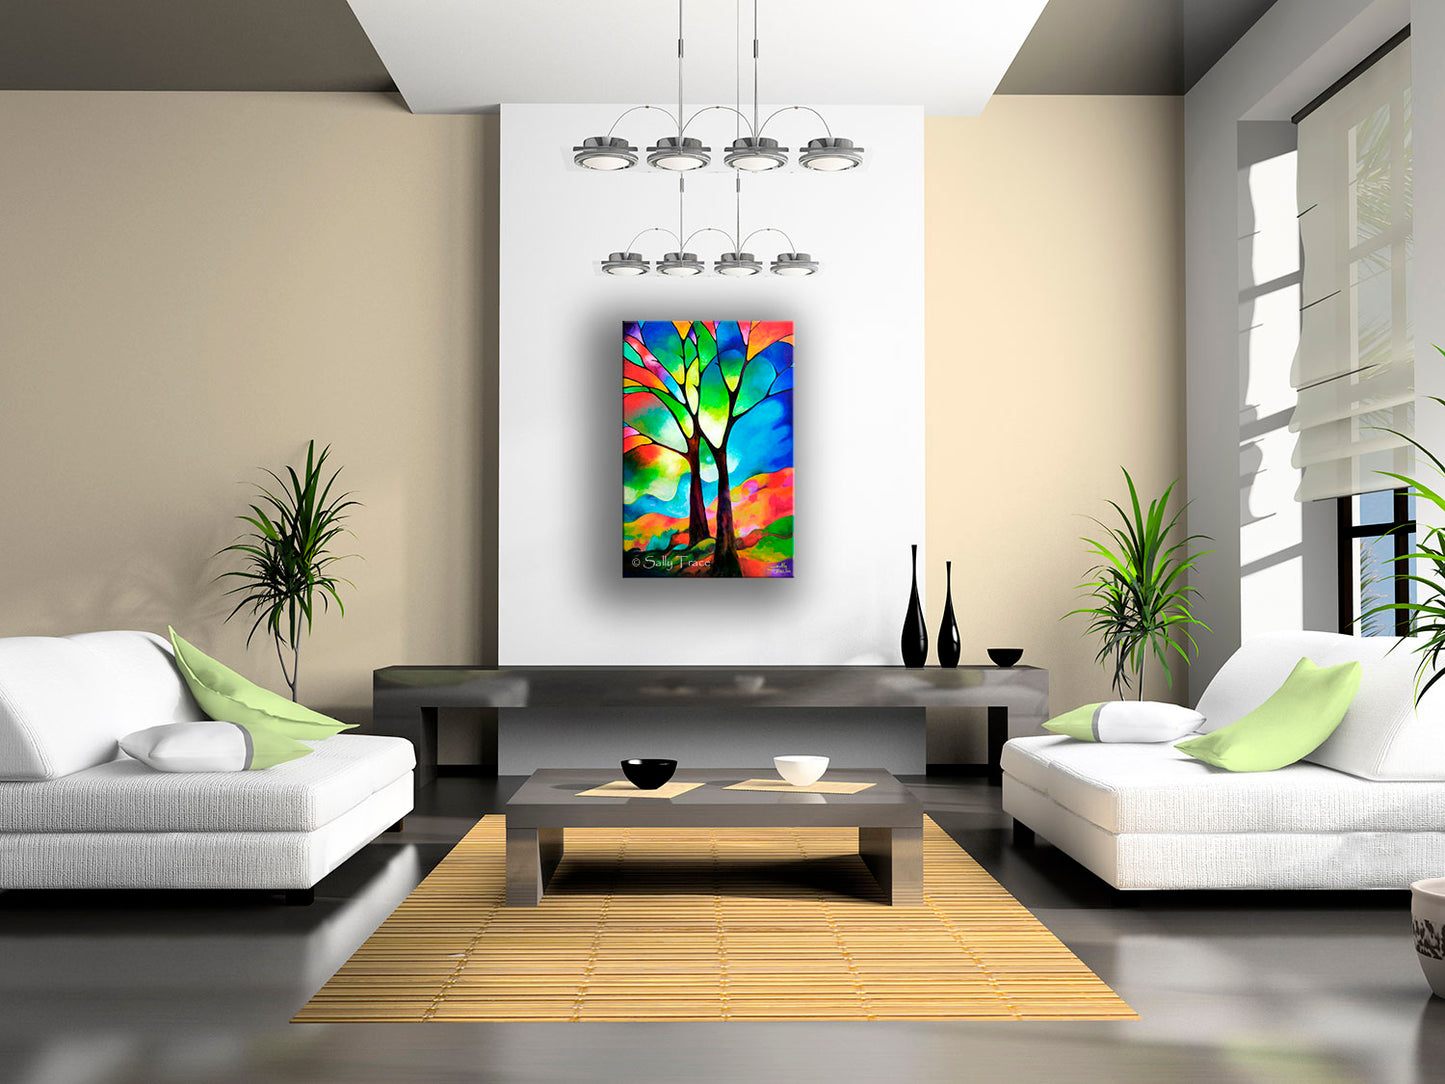 Two trees giclee prints by Sally Trace, from the original abstract painting, room view